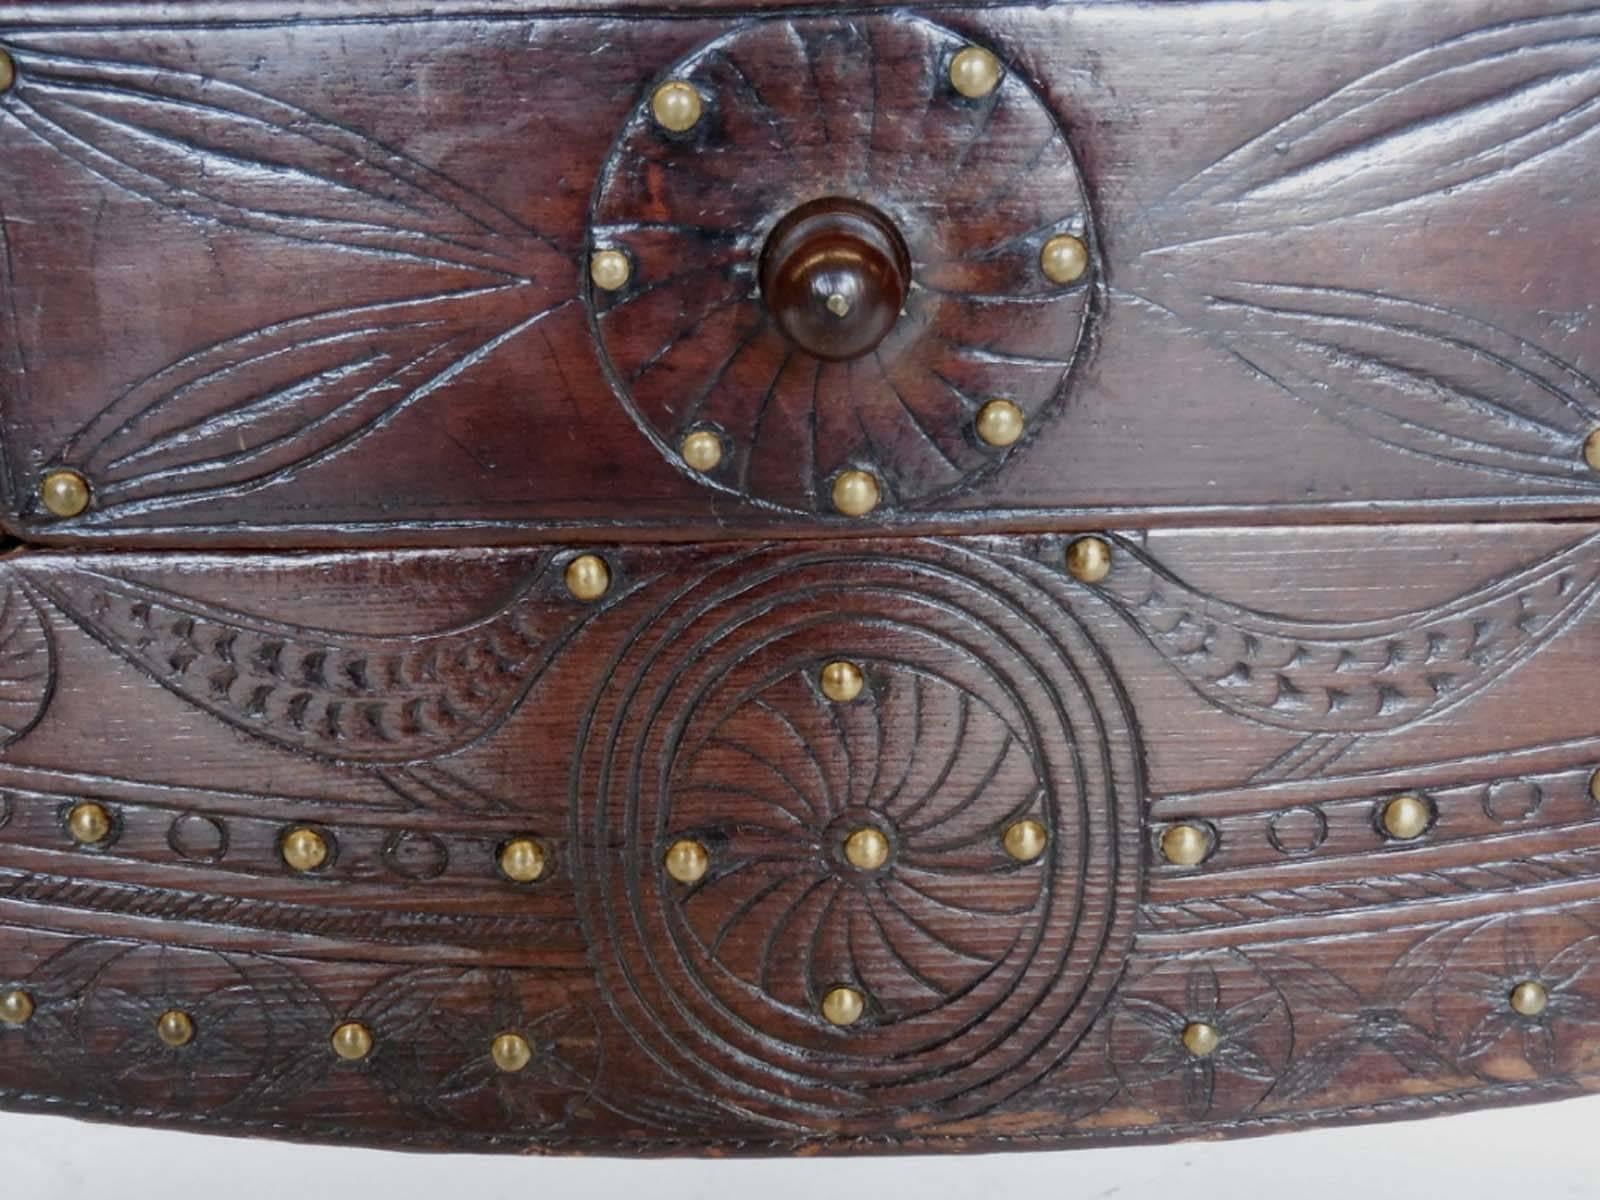 Where colonial Spain and indigenous Guatemala meets, here is a Nahuala (animal spirit) table with carved lion foot front legs and animal inspired carvings and typical Spanish Colonial turned back legs. Three drawers, all dove tail construction.